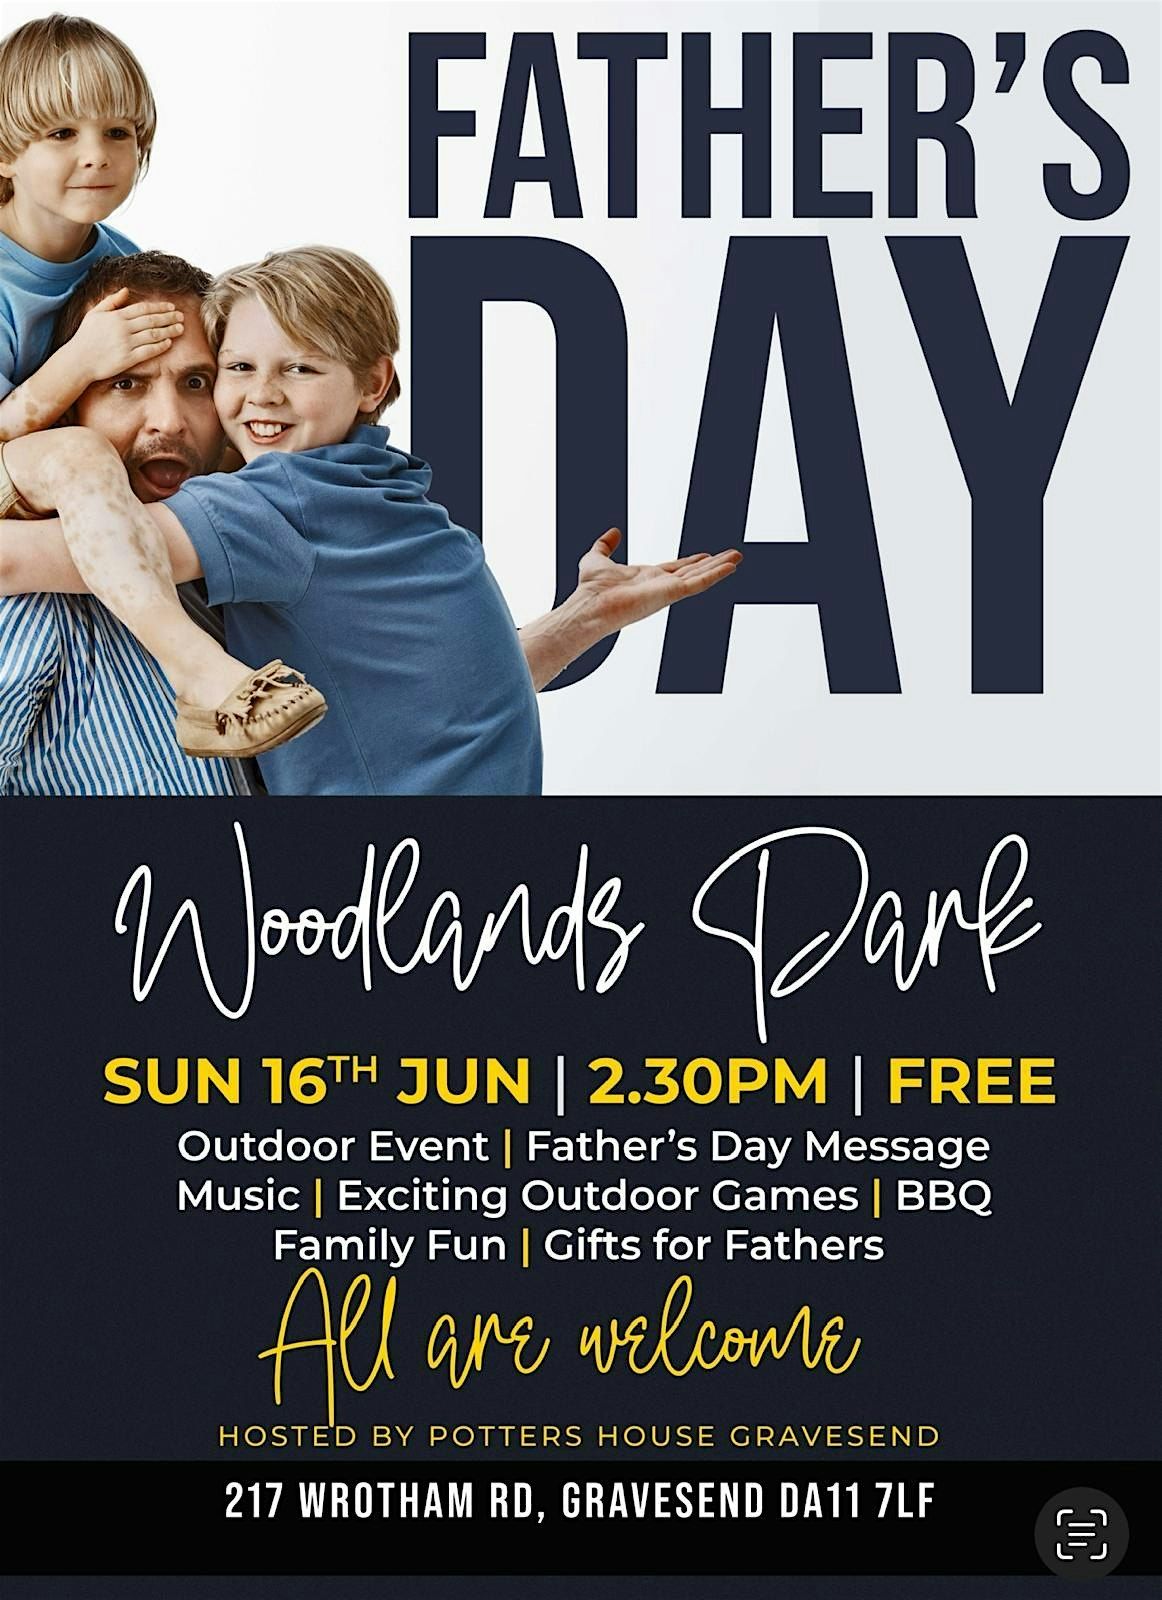 FATHERS DAY  EVENT